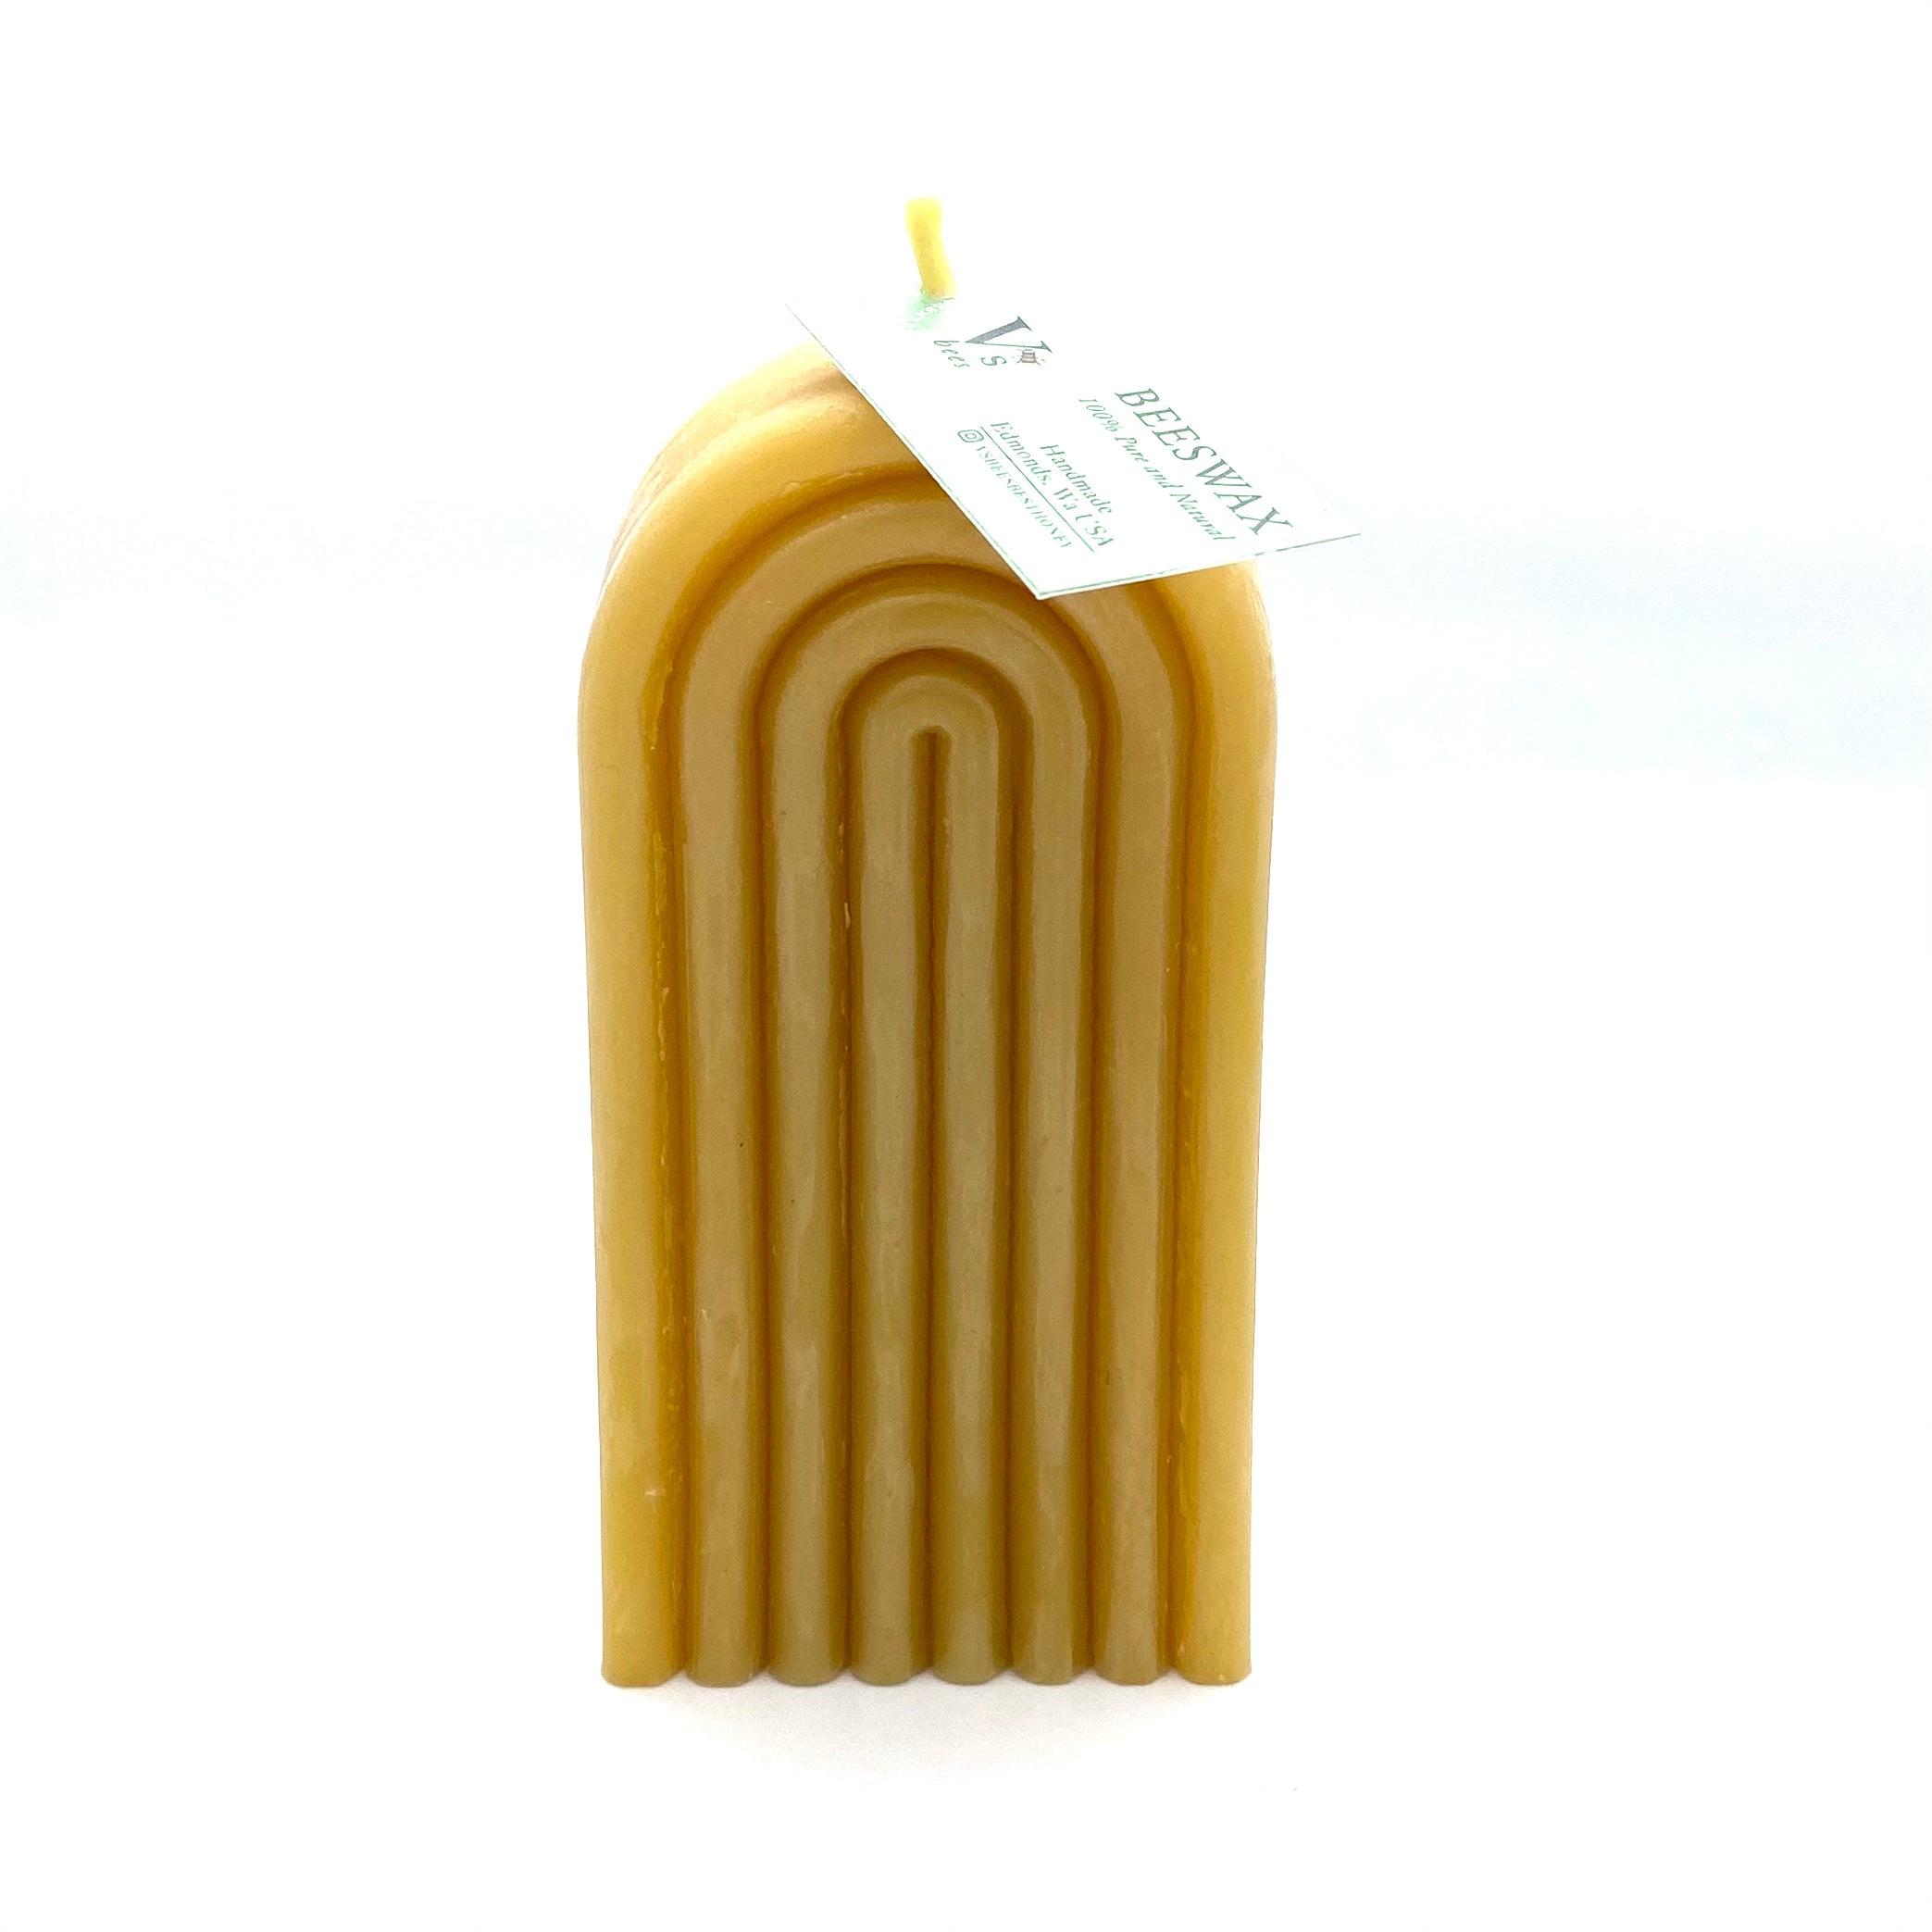 V's Bees Beeswax Candles